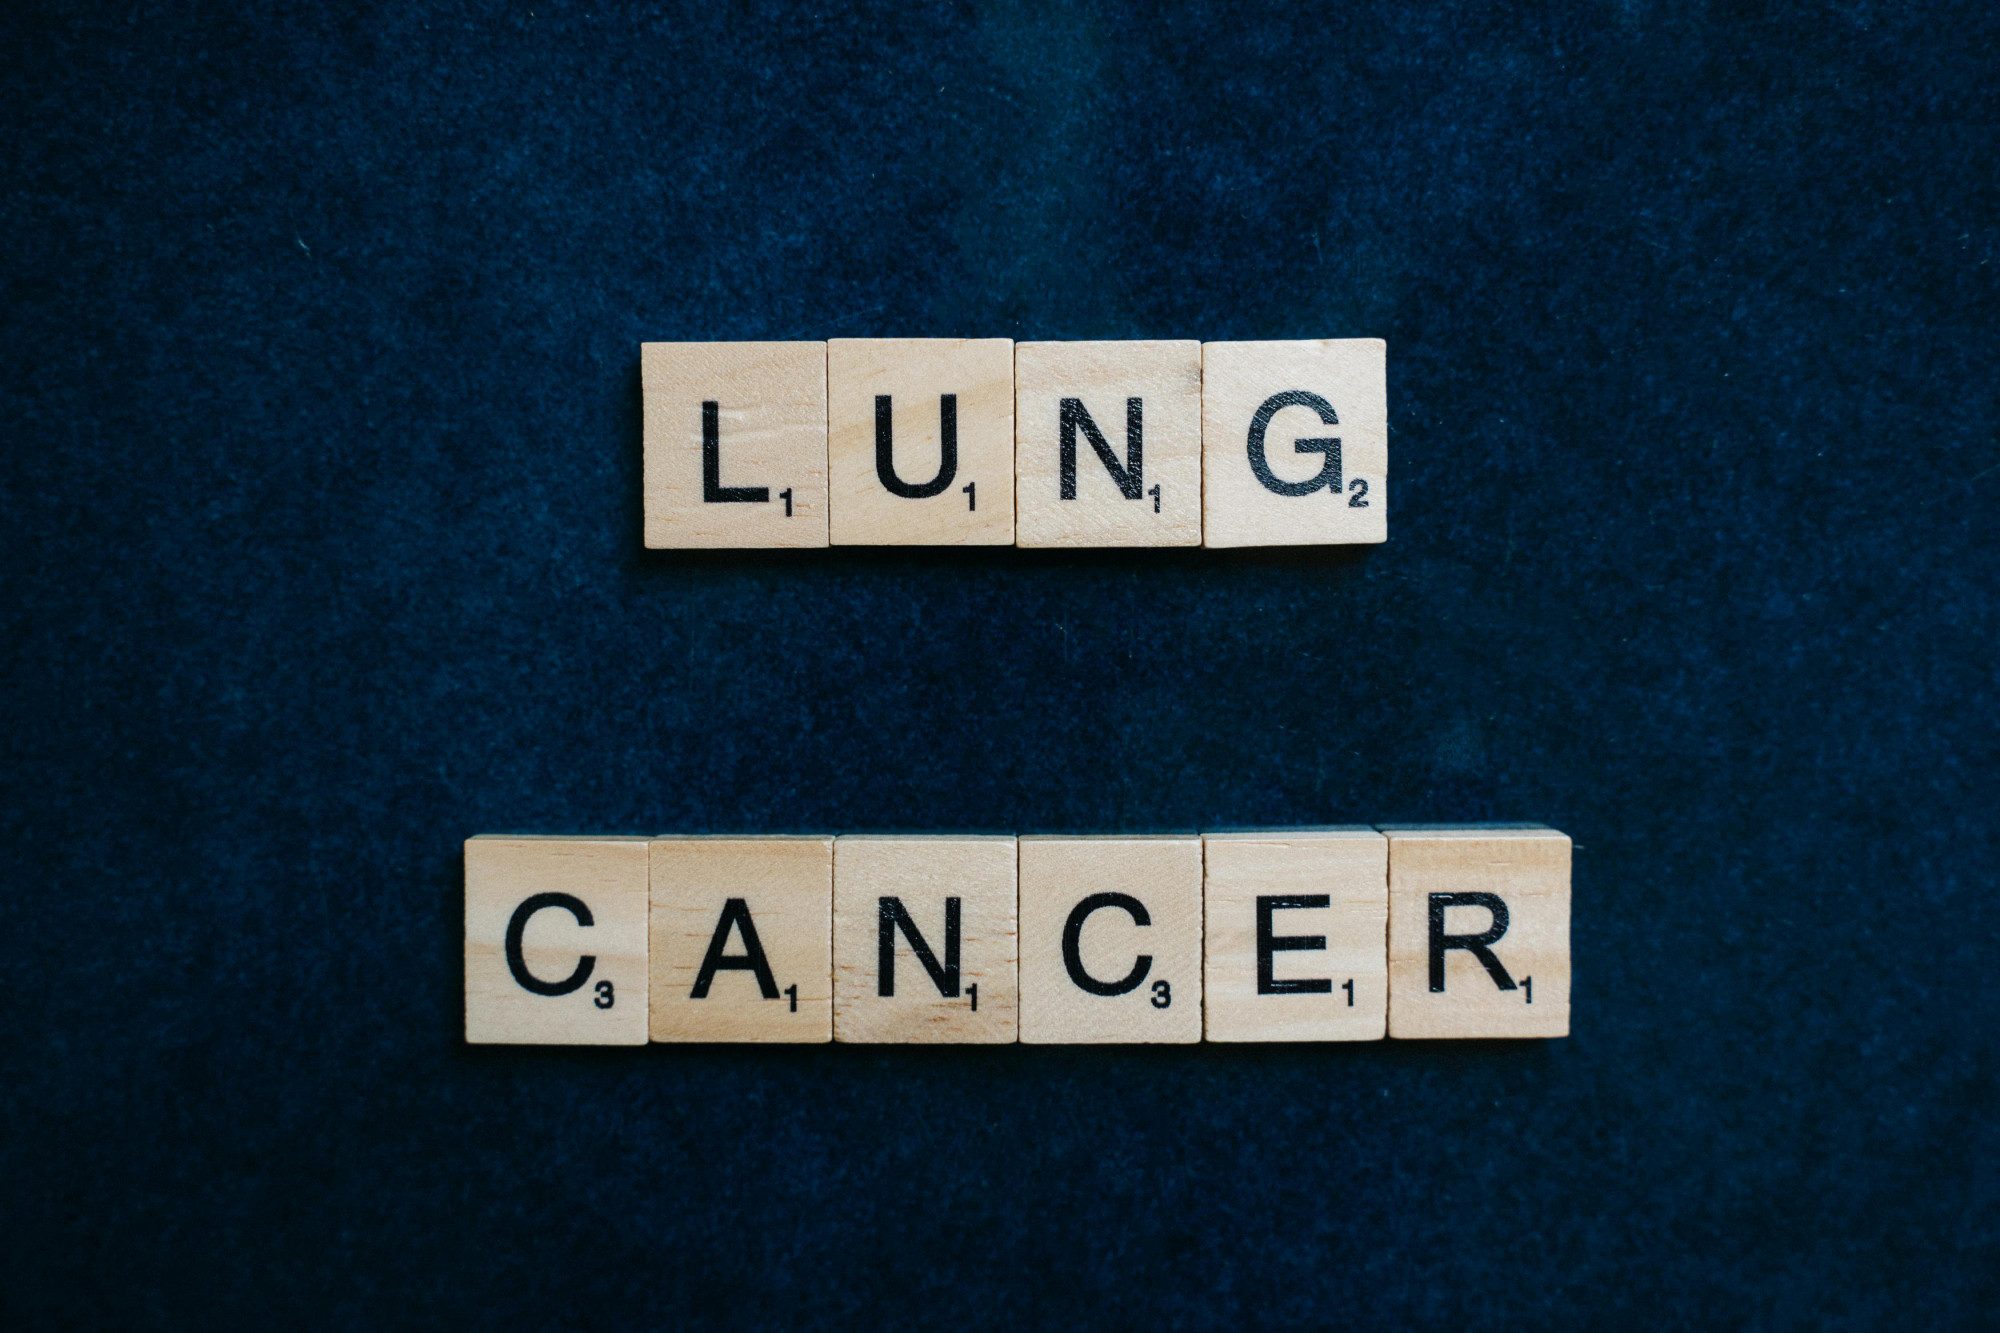 "Lung Cancer!